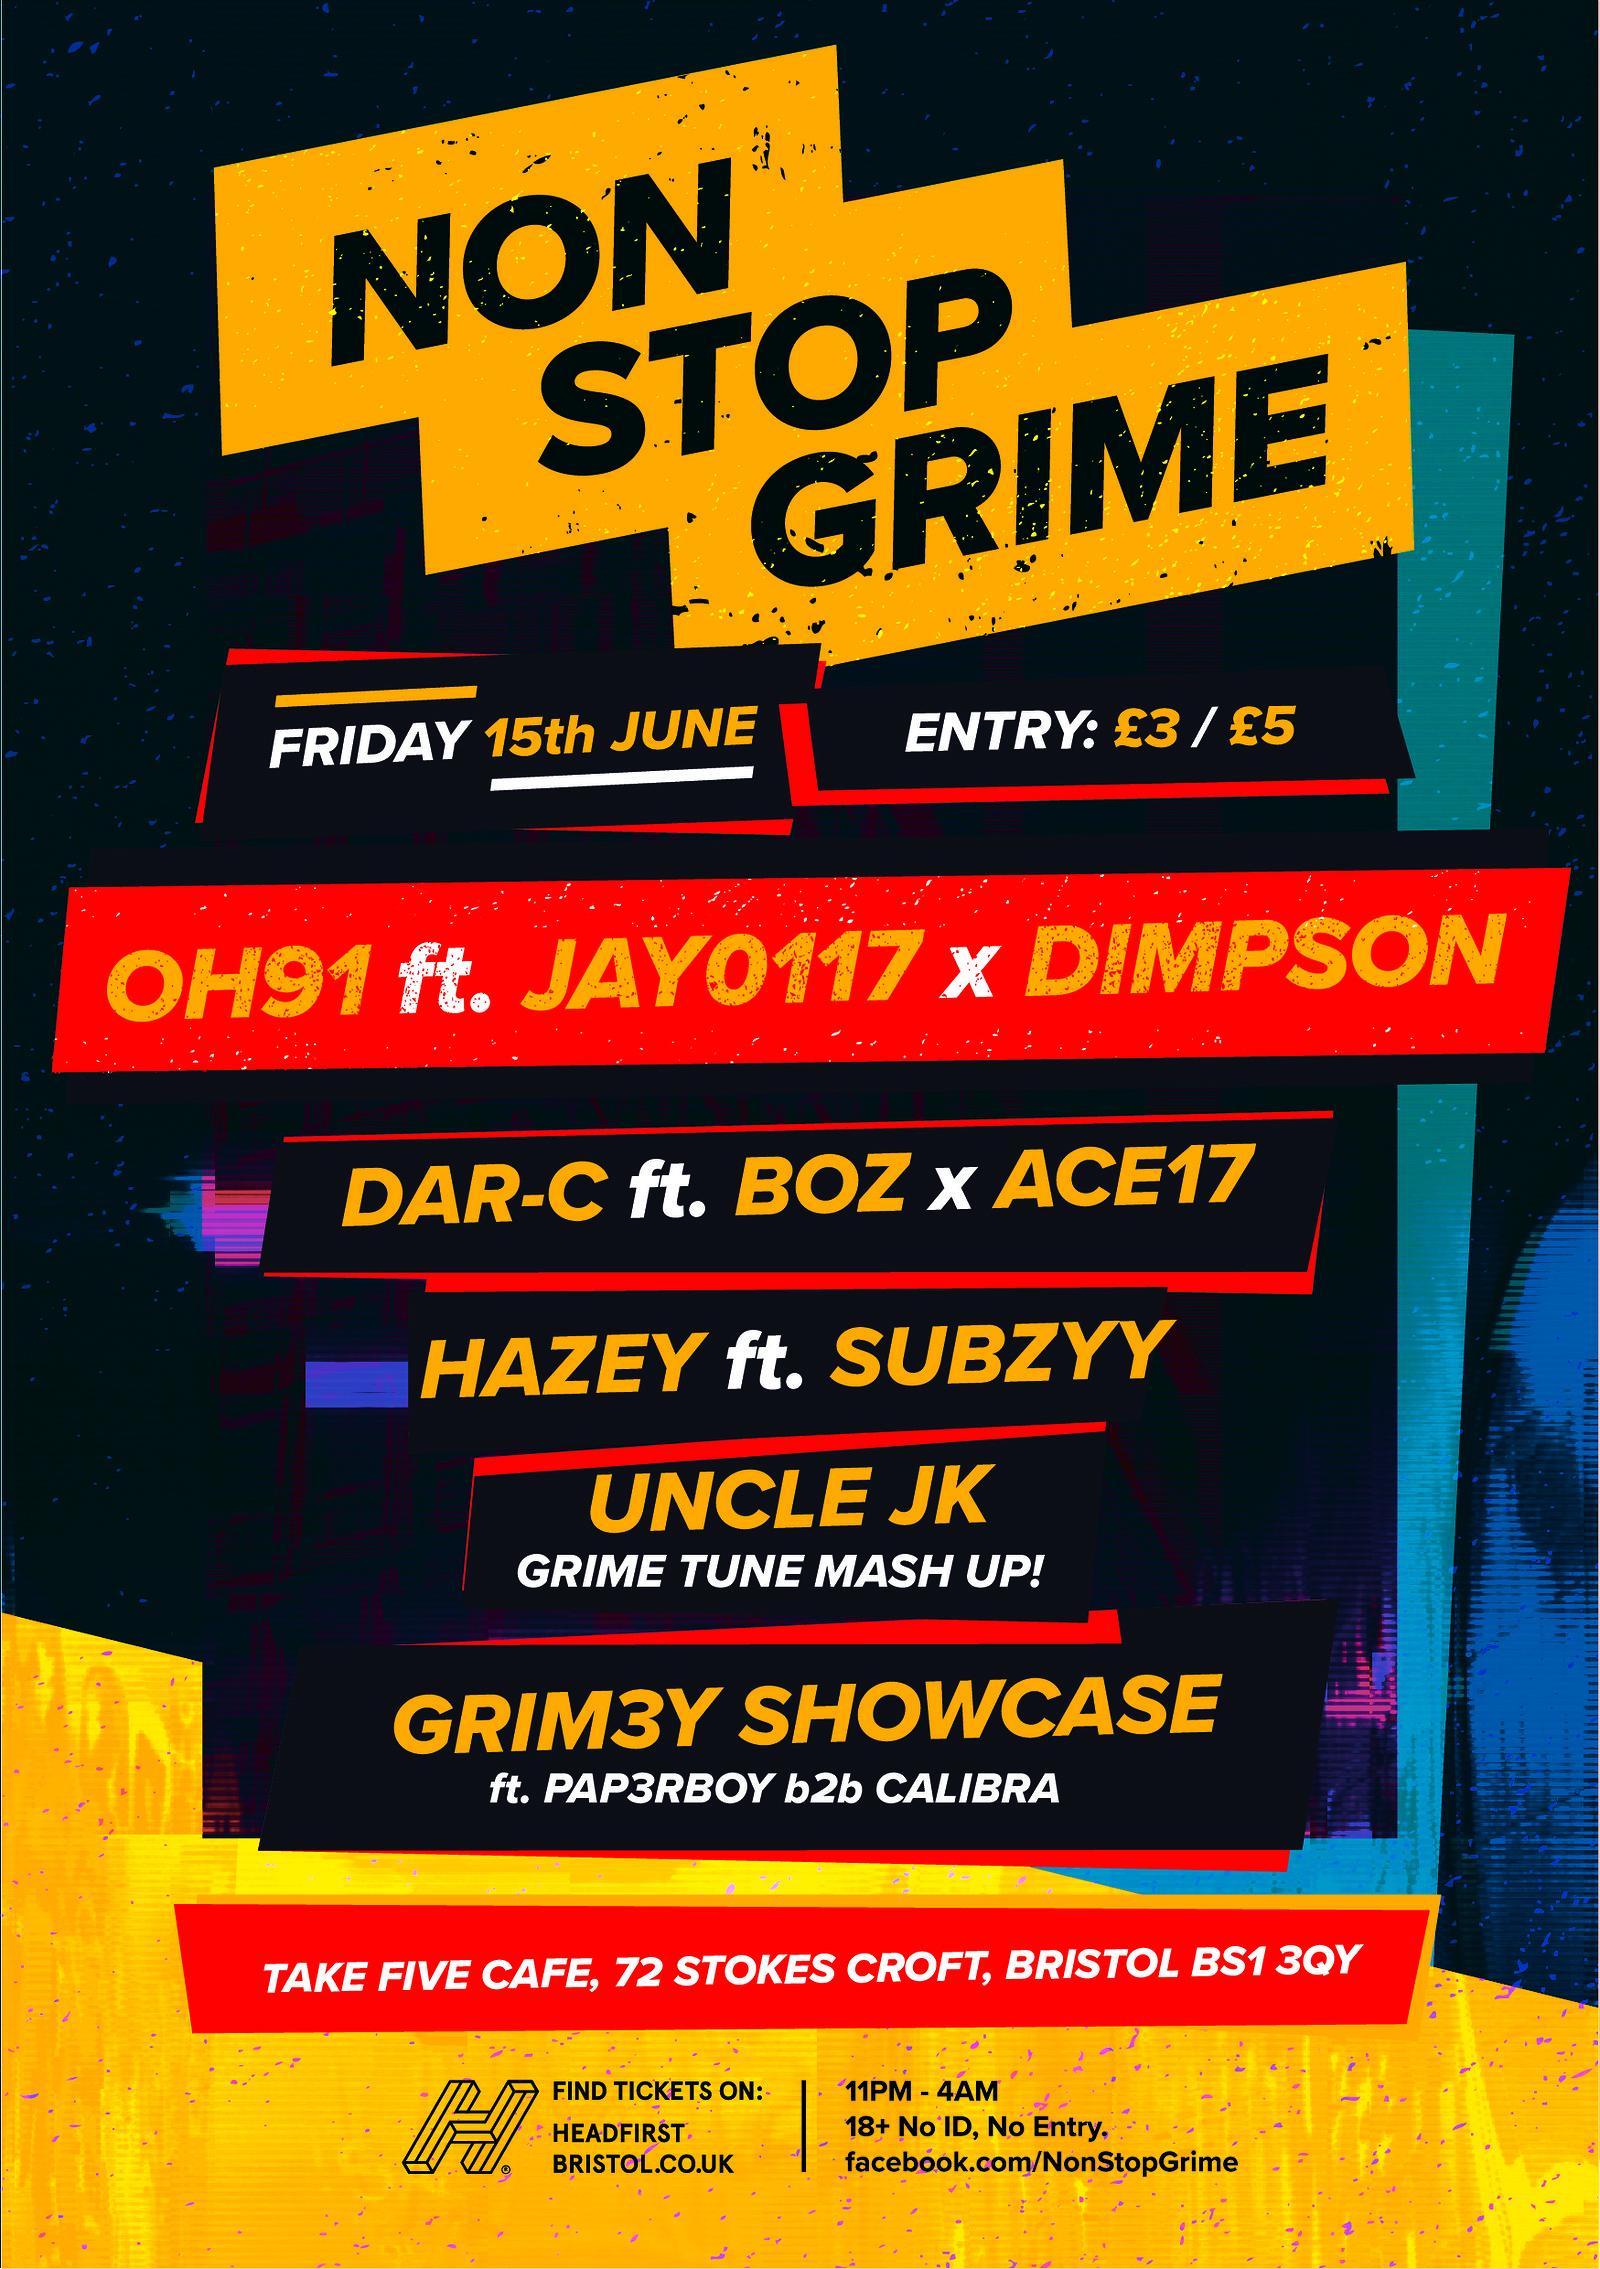 NonStopGrime presents: Oh91 ft Jay0117 x Dimpson at Take Five Cafe